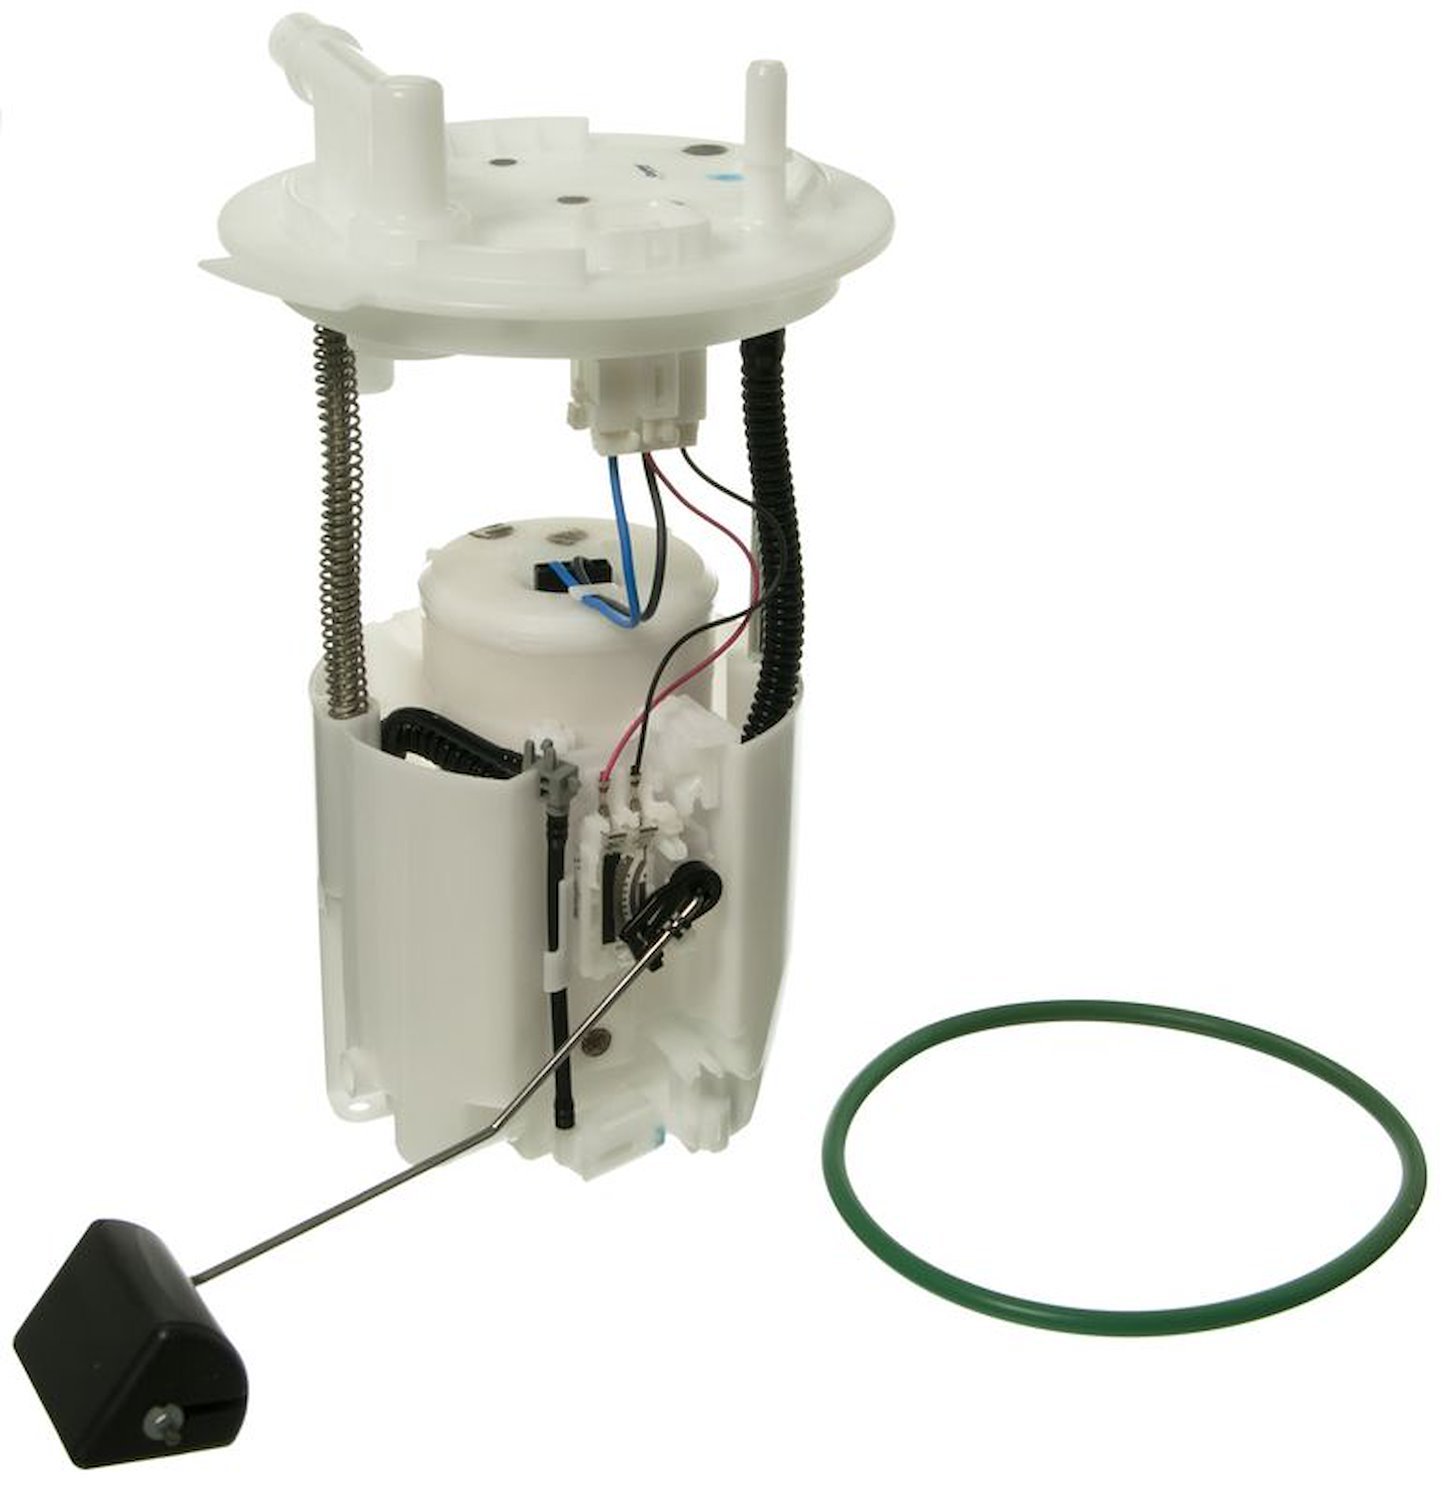 OE Ford/Mercury Fuel Pump Module Assembly for 2008-2009 Ford Taurus/Mercury Sable